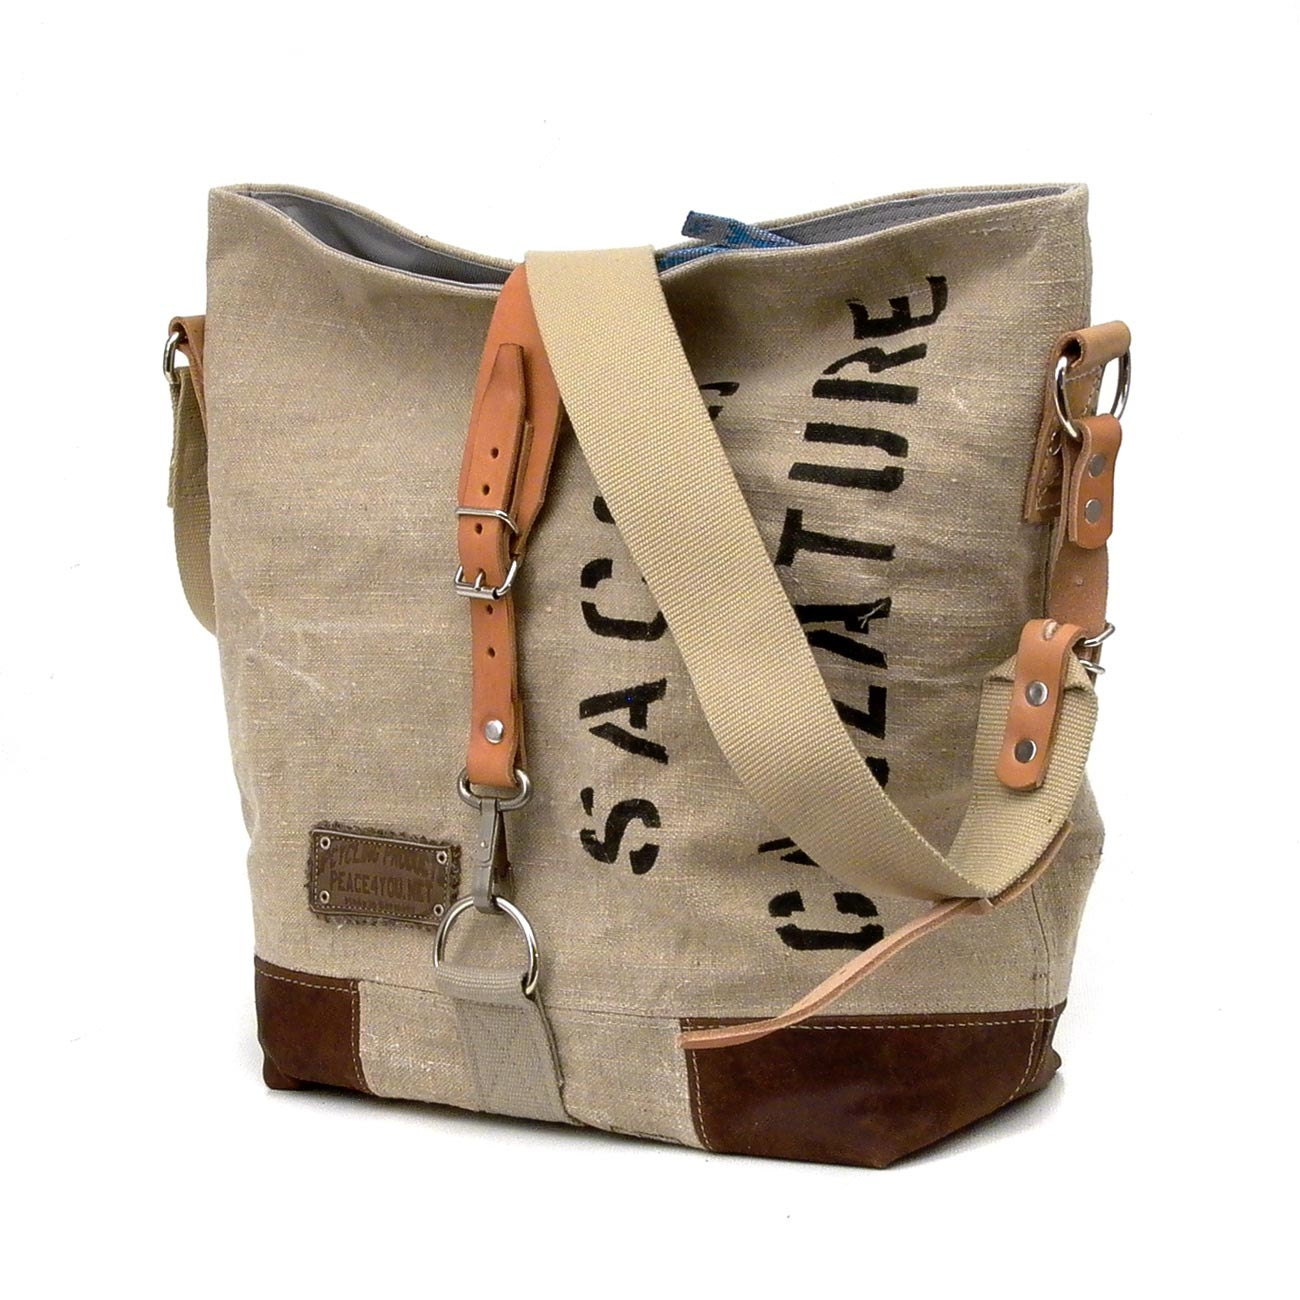 Italian Military Duffle Bag Canvas Tote // Upcycled and